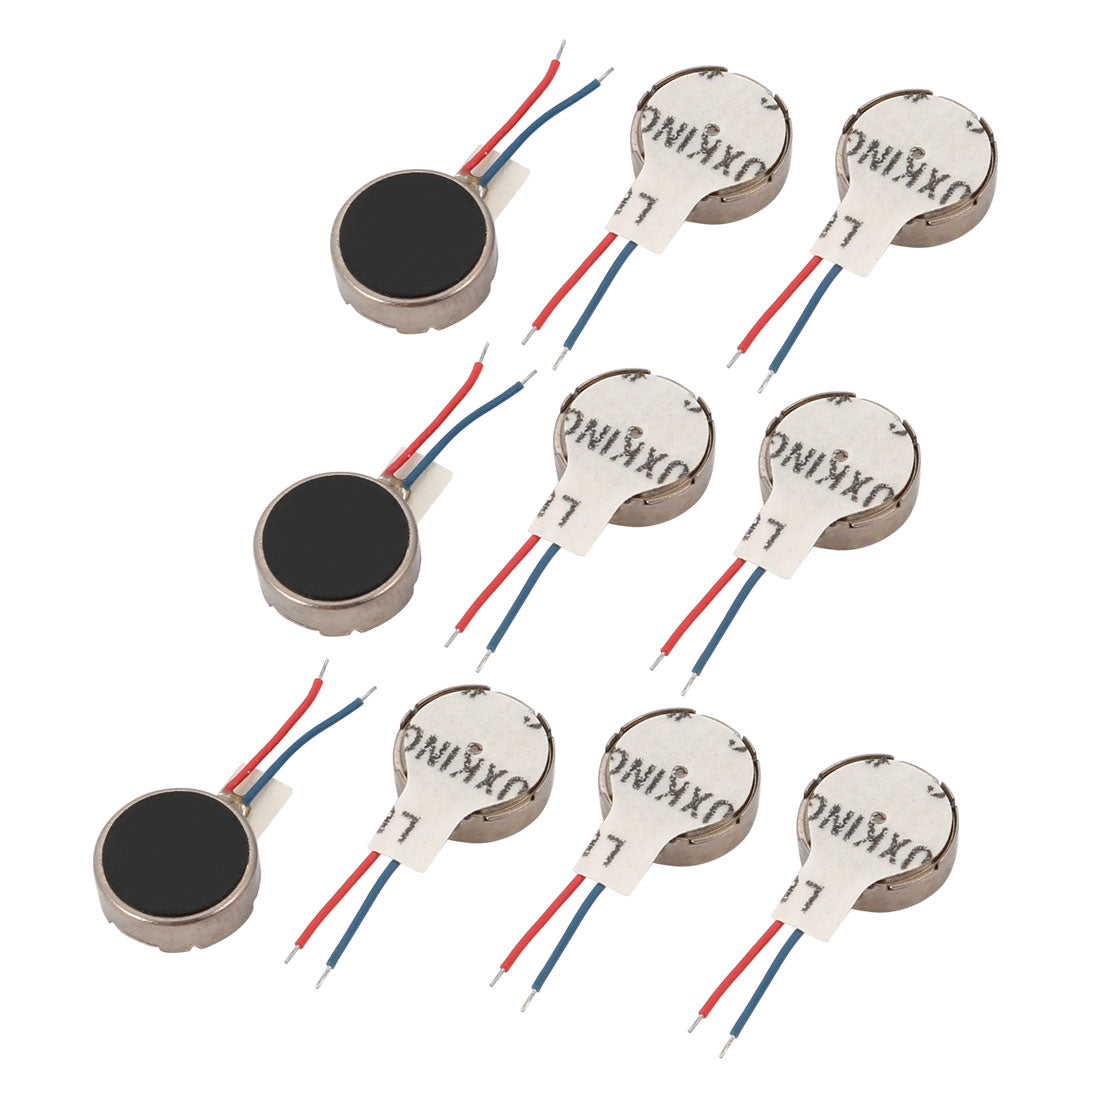 uxcell Uxcell 10Pcs DC 3V 10mm Dia Mobile Phone Coin Flat Vibrating Vibration Motor w Wire